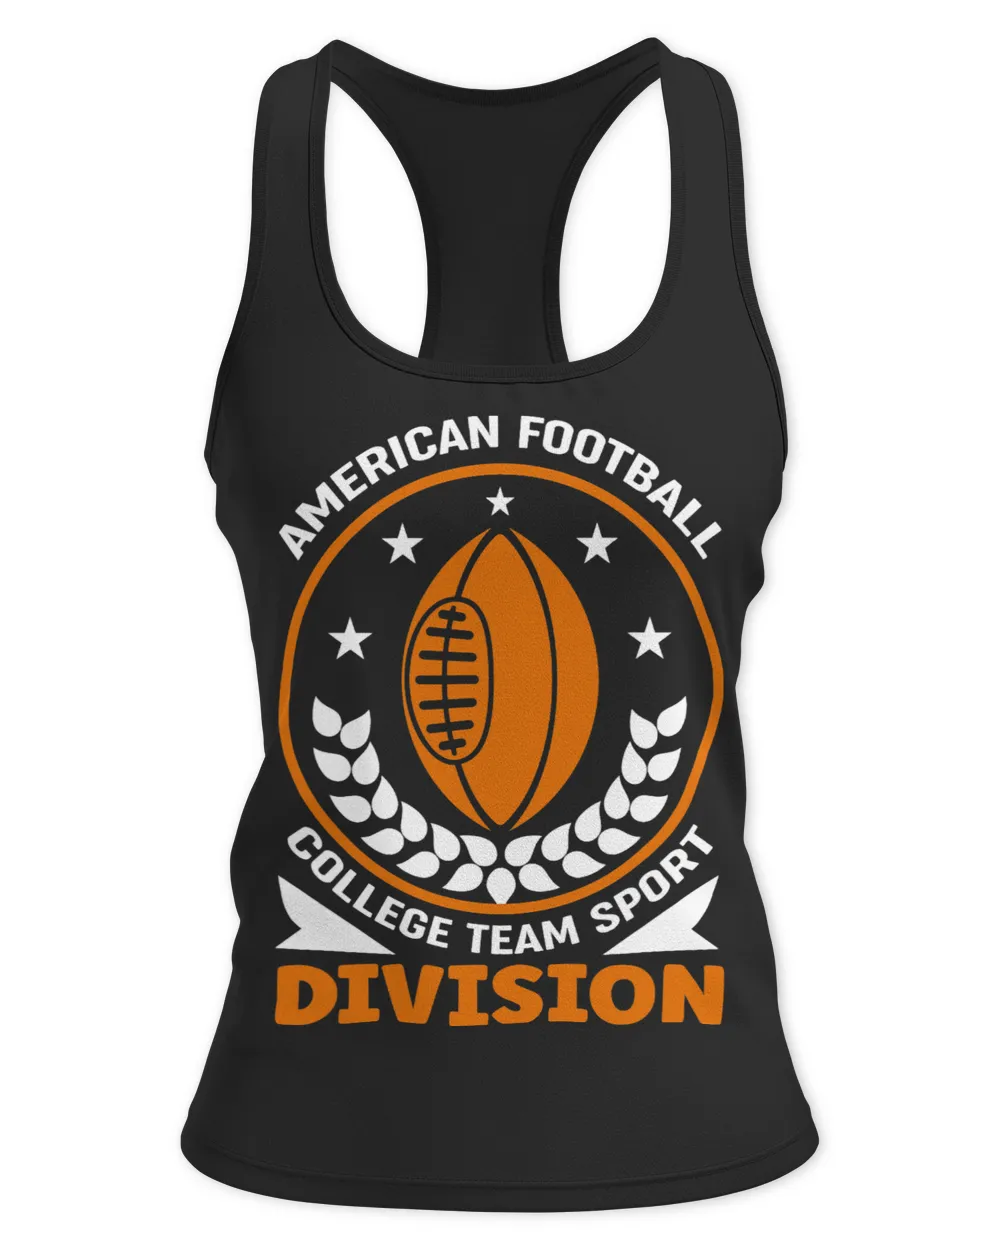 Football American Division Perfect for School Players